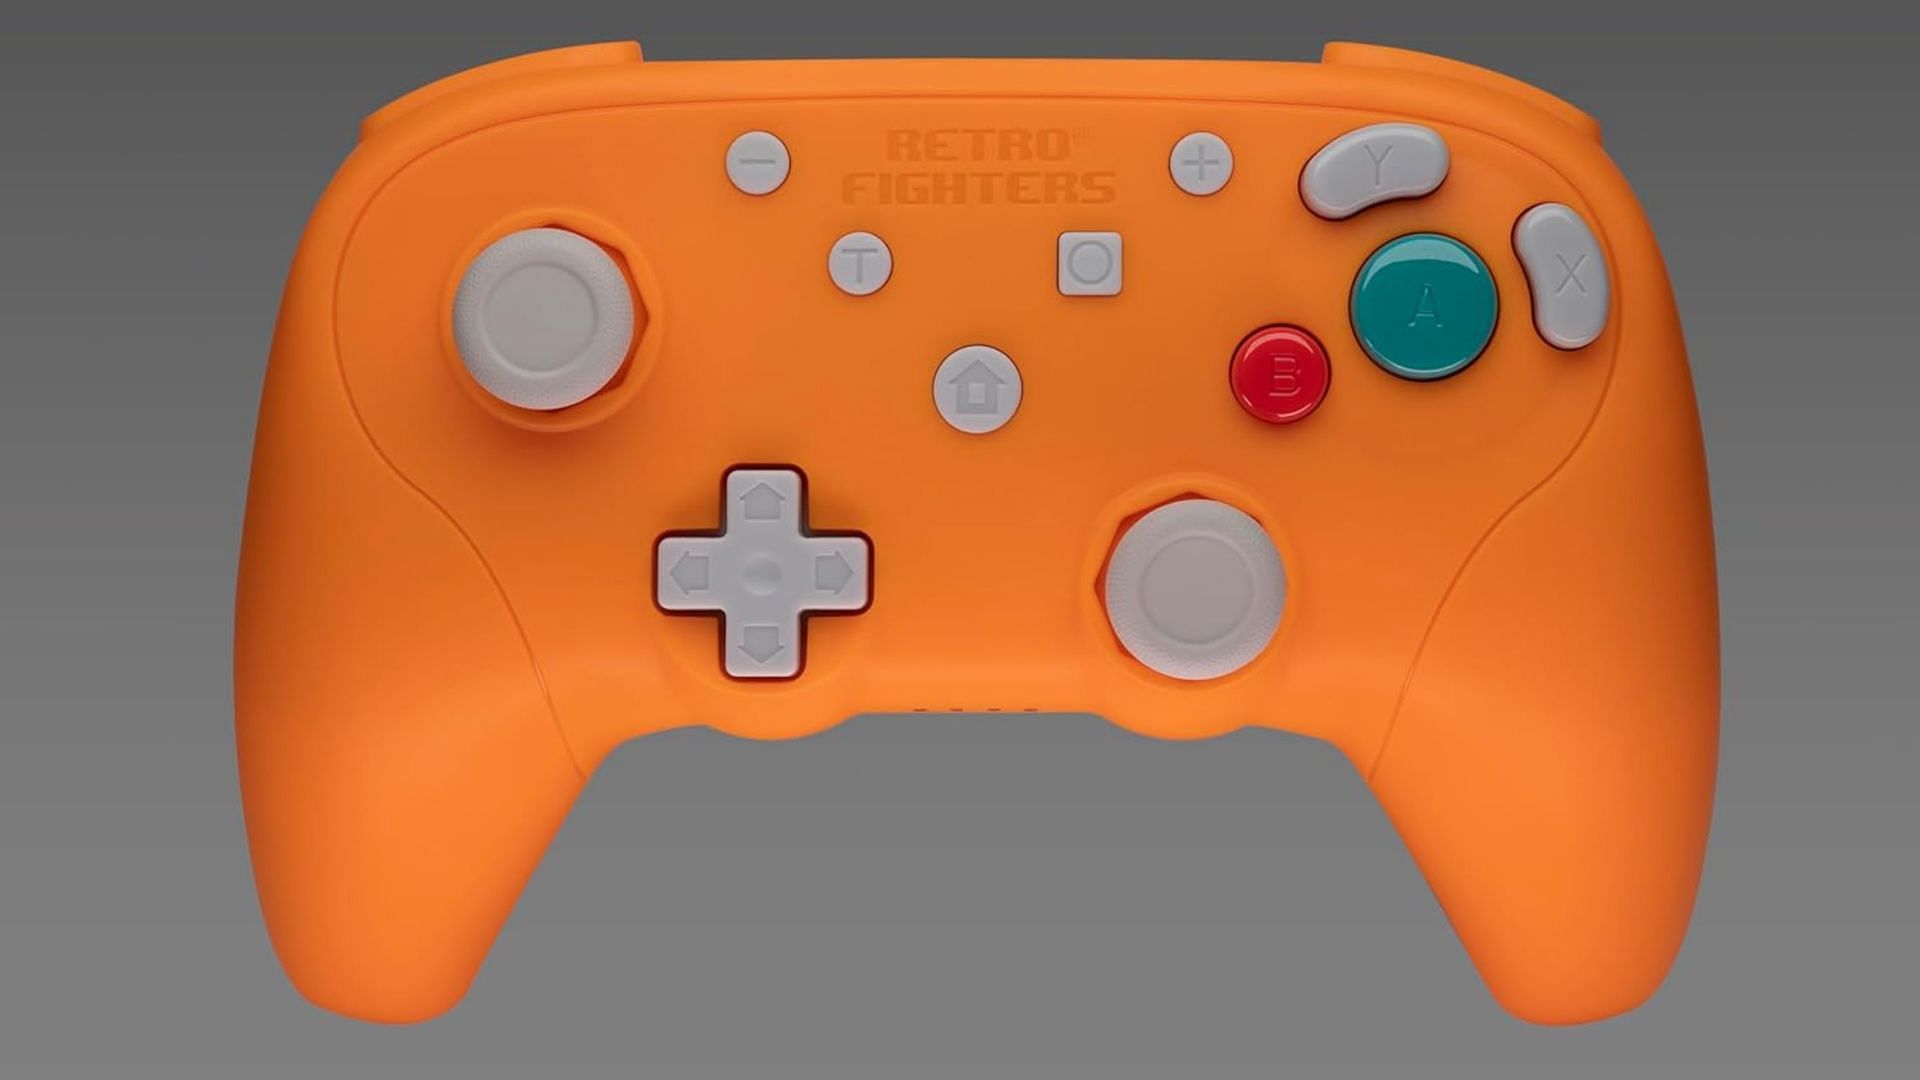 A bright orange color variant is also available (Image via Retro Fighters)